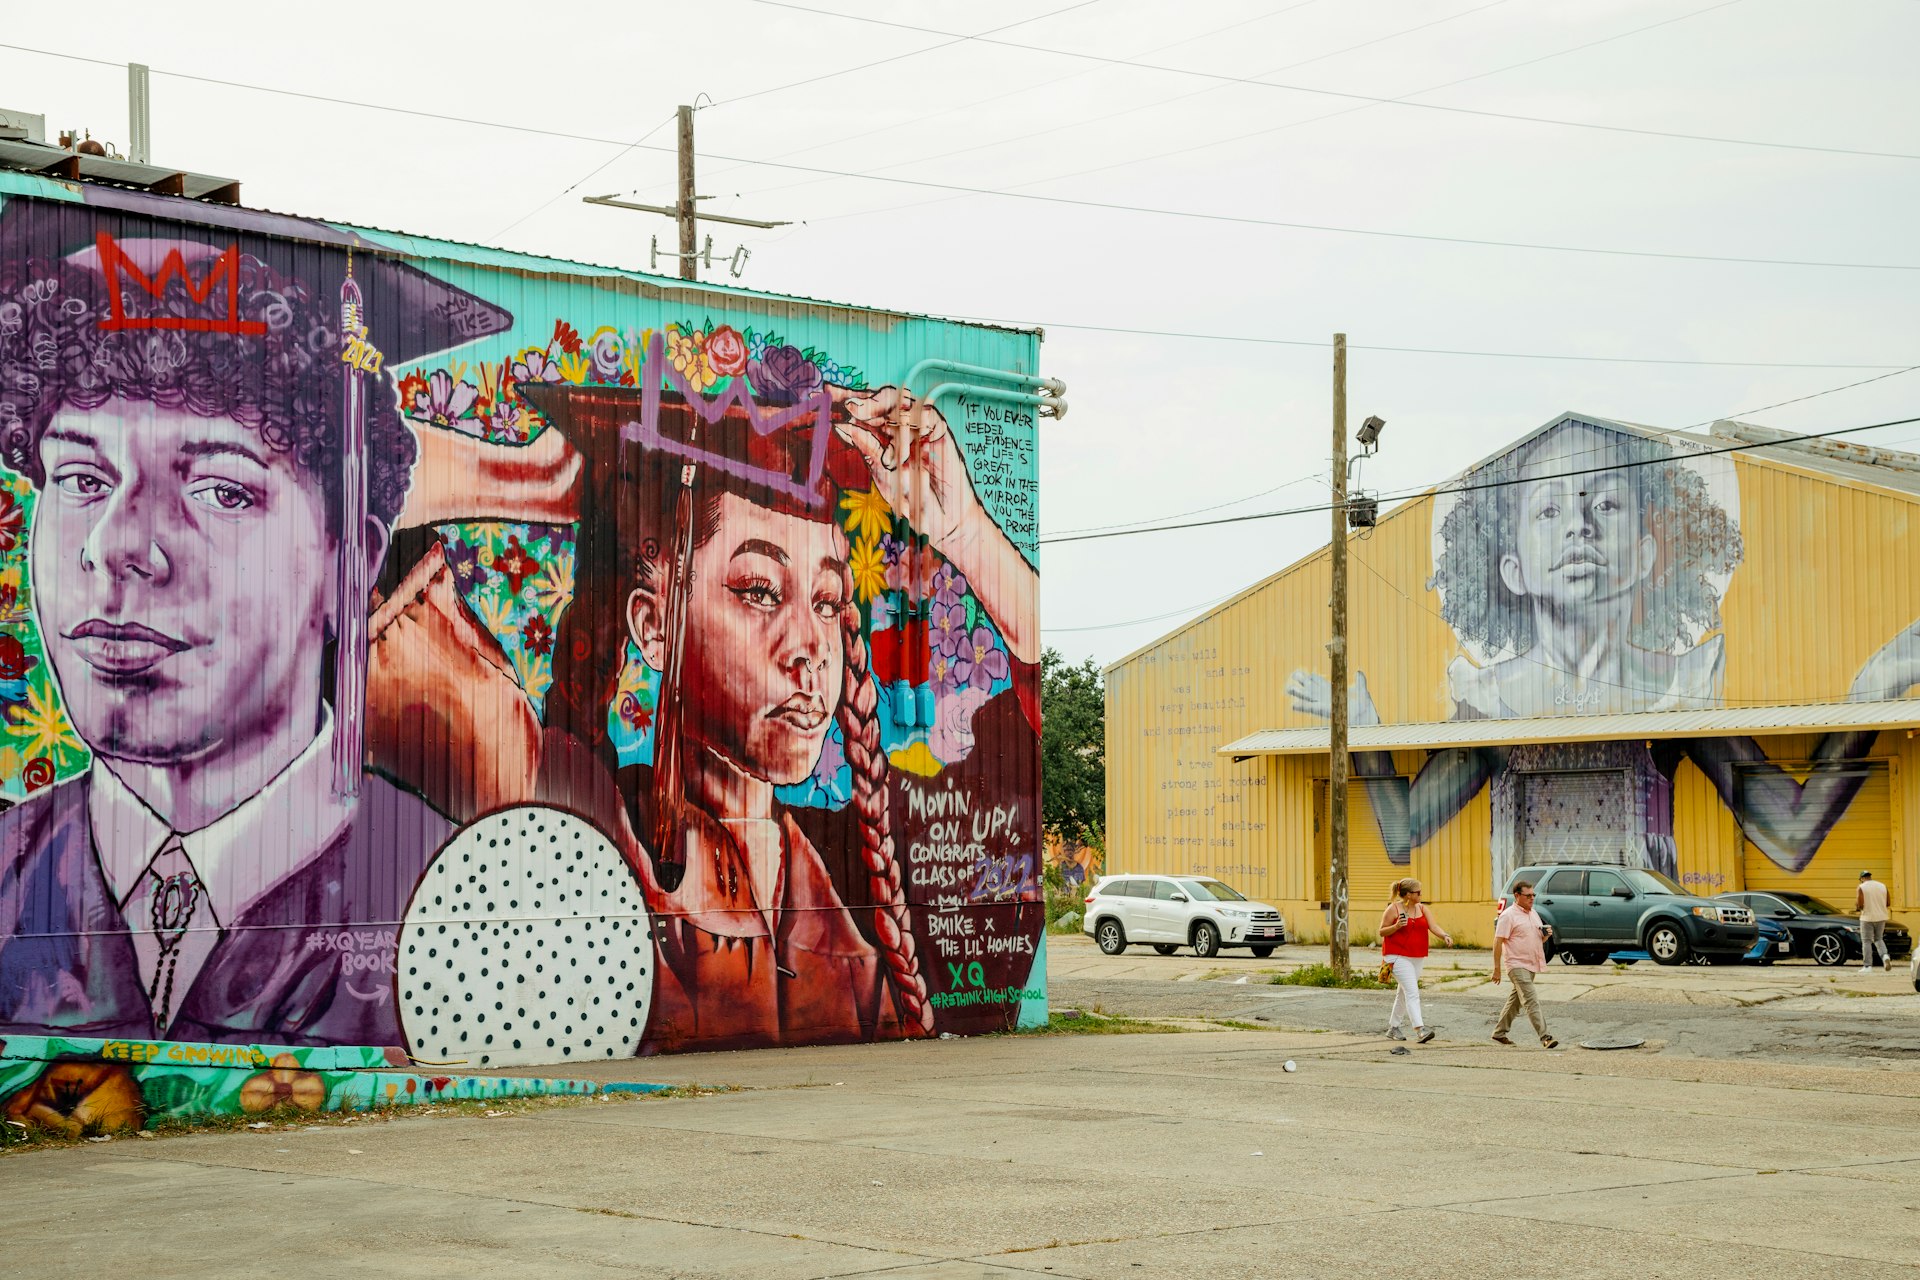 Brandon “B Mike” Odoms repurposed some abandoned warehouses into a gallery and workspace. His murals cover the exterior of the buildings